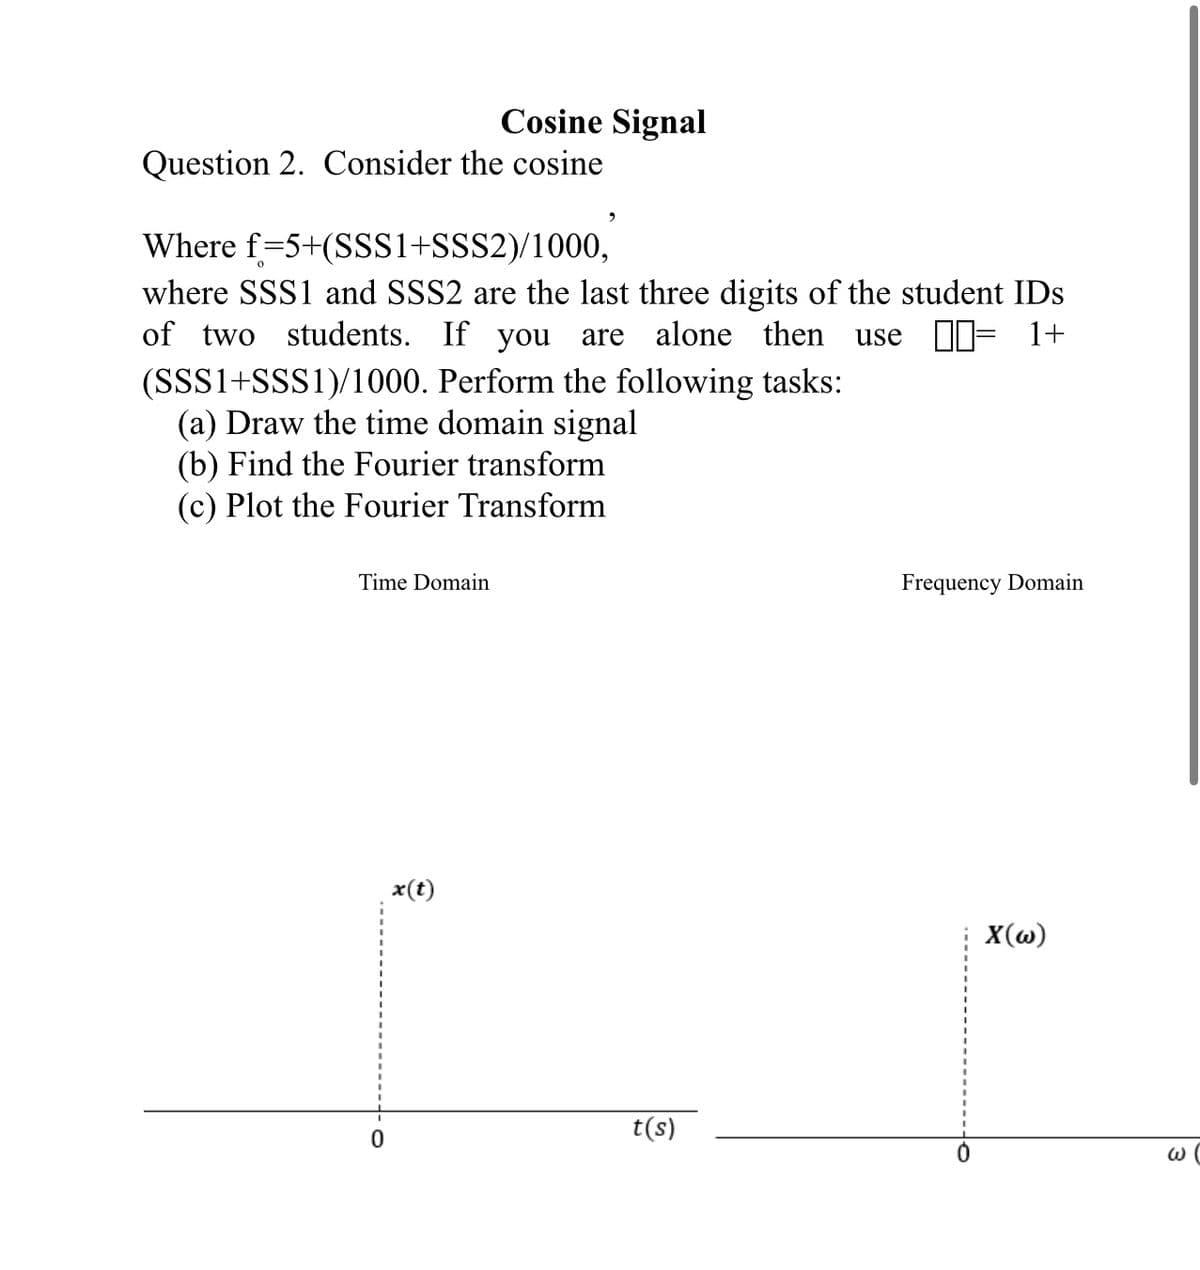 Question 2. Consider the cosine
Cosine Signal
Time Domain
Where f=5+(SSS1+SSS2)/1000,
where SSS1 and SSS2 are the last three digits of the student IDs
of two students. If you are alone then use = 1+
(SSS1+SSS1)/1000. Perform the following tasks:
(a) Draw the time domain signal
(b) Find the Fourier transform
(c) Plot the Fourier Transform
x(t)
2
t(s)
Frequency Domain
X(w)
W (